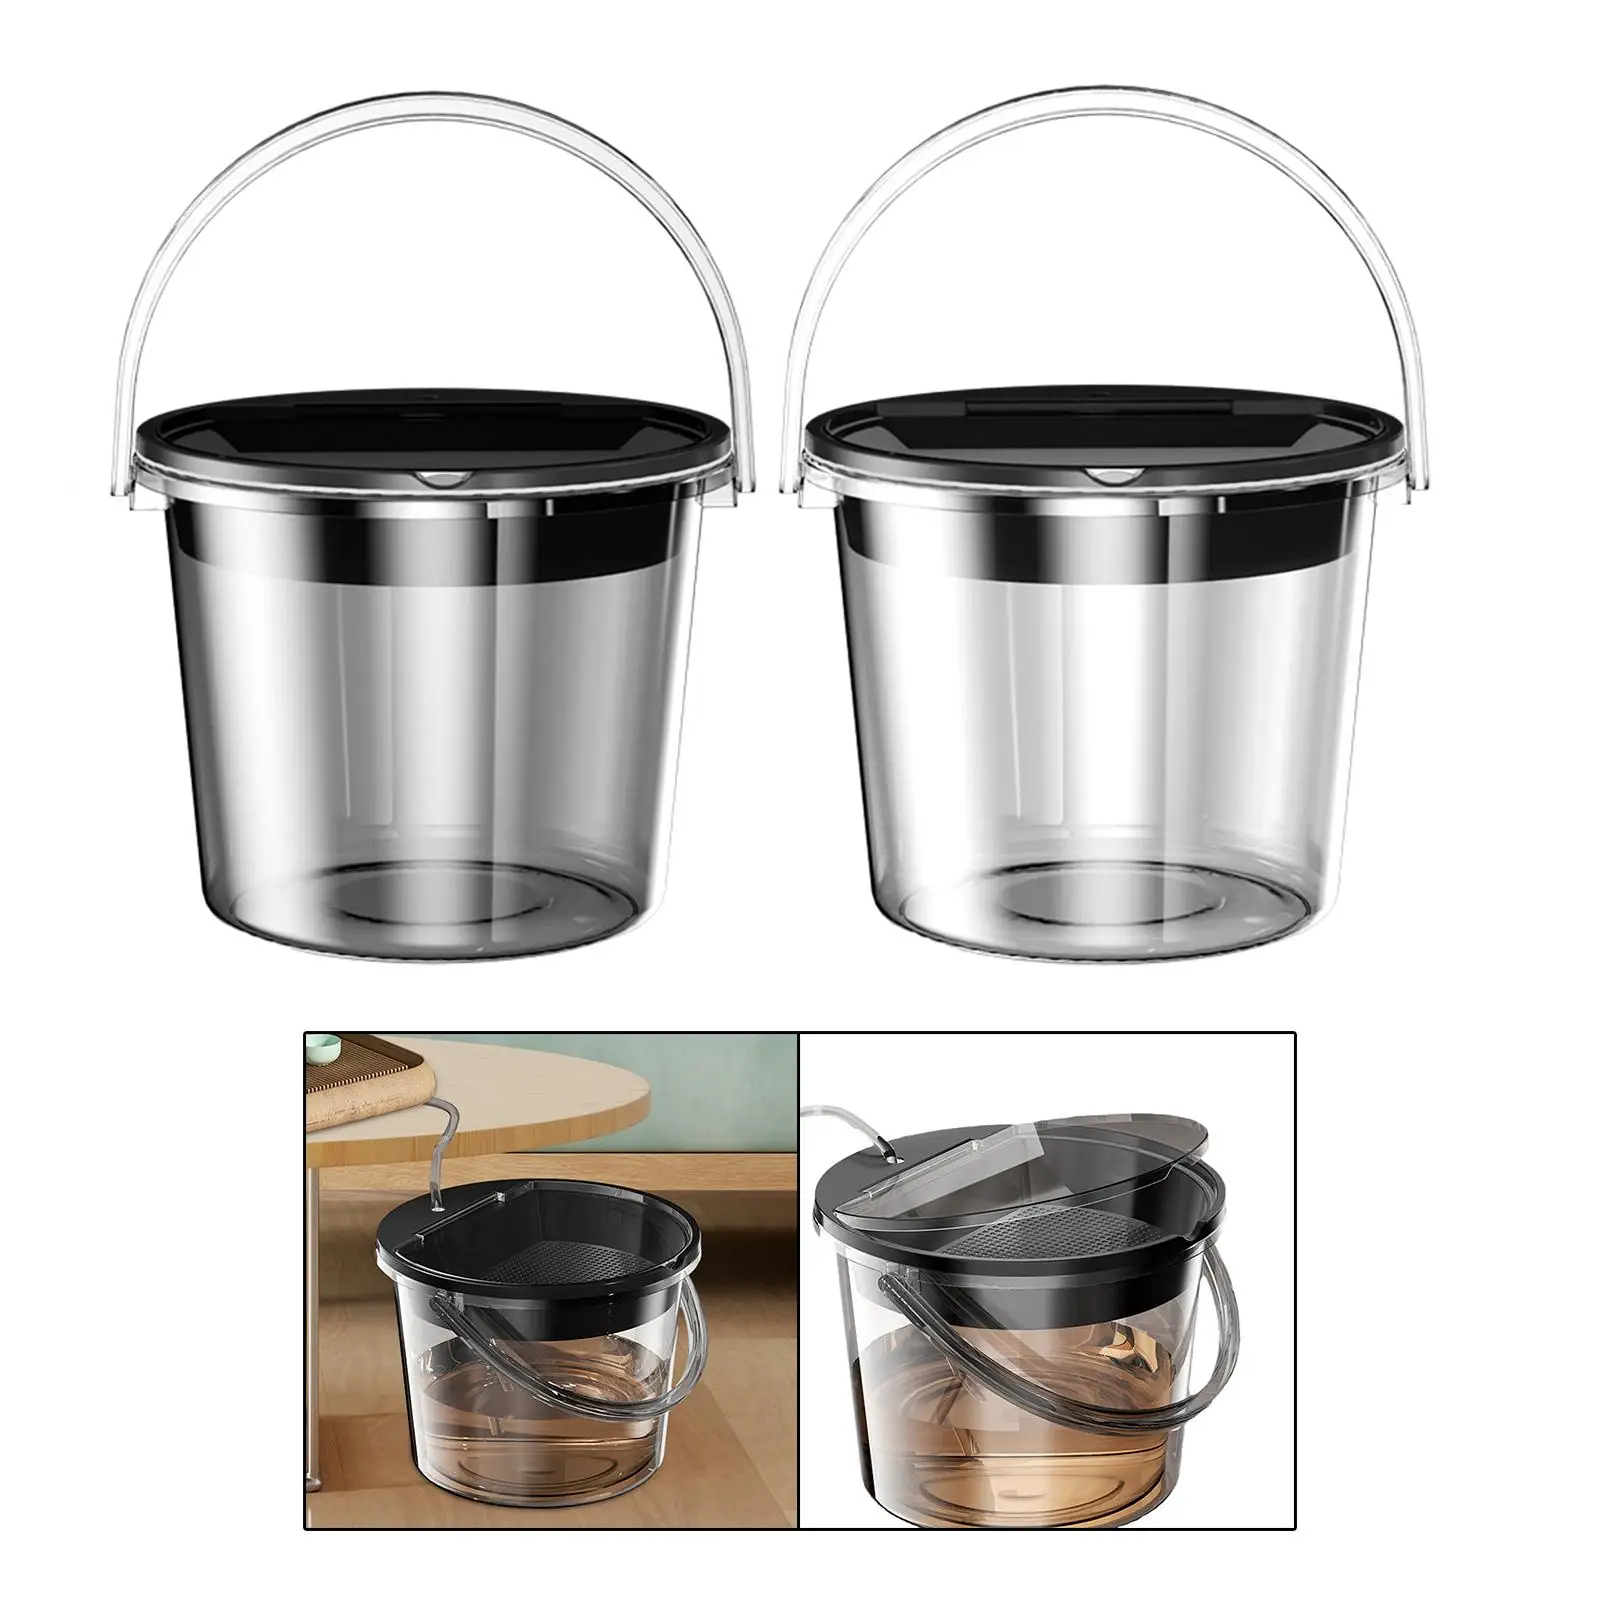 Wastebasket Bin Chinese Kung Fu Tea Accessory Detachable Trash Can Tea Dregs Buckets Garbage Can for Home Bedroom Office Kitchen